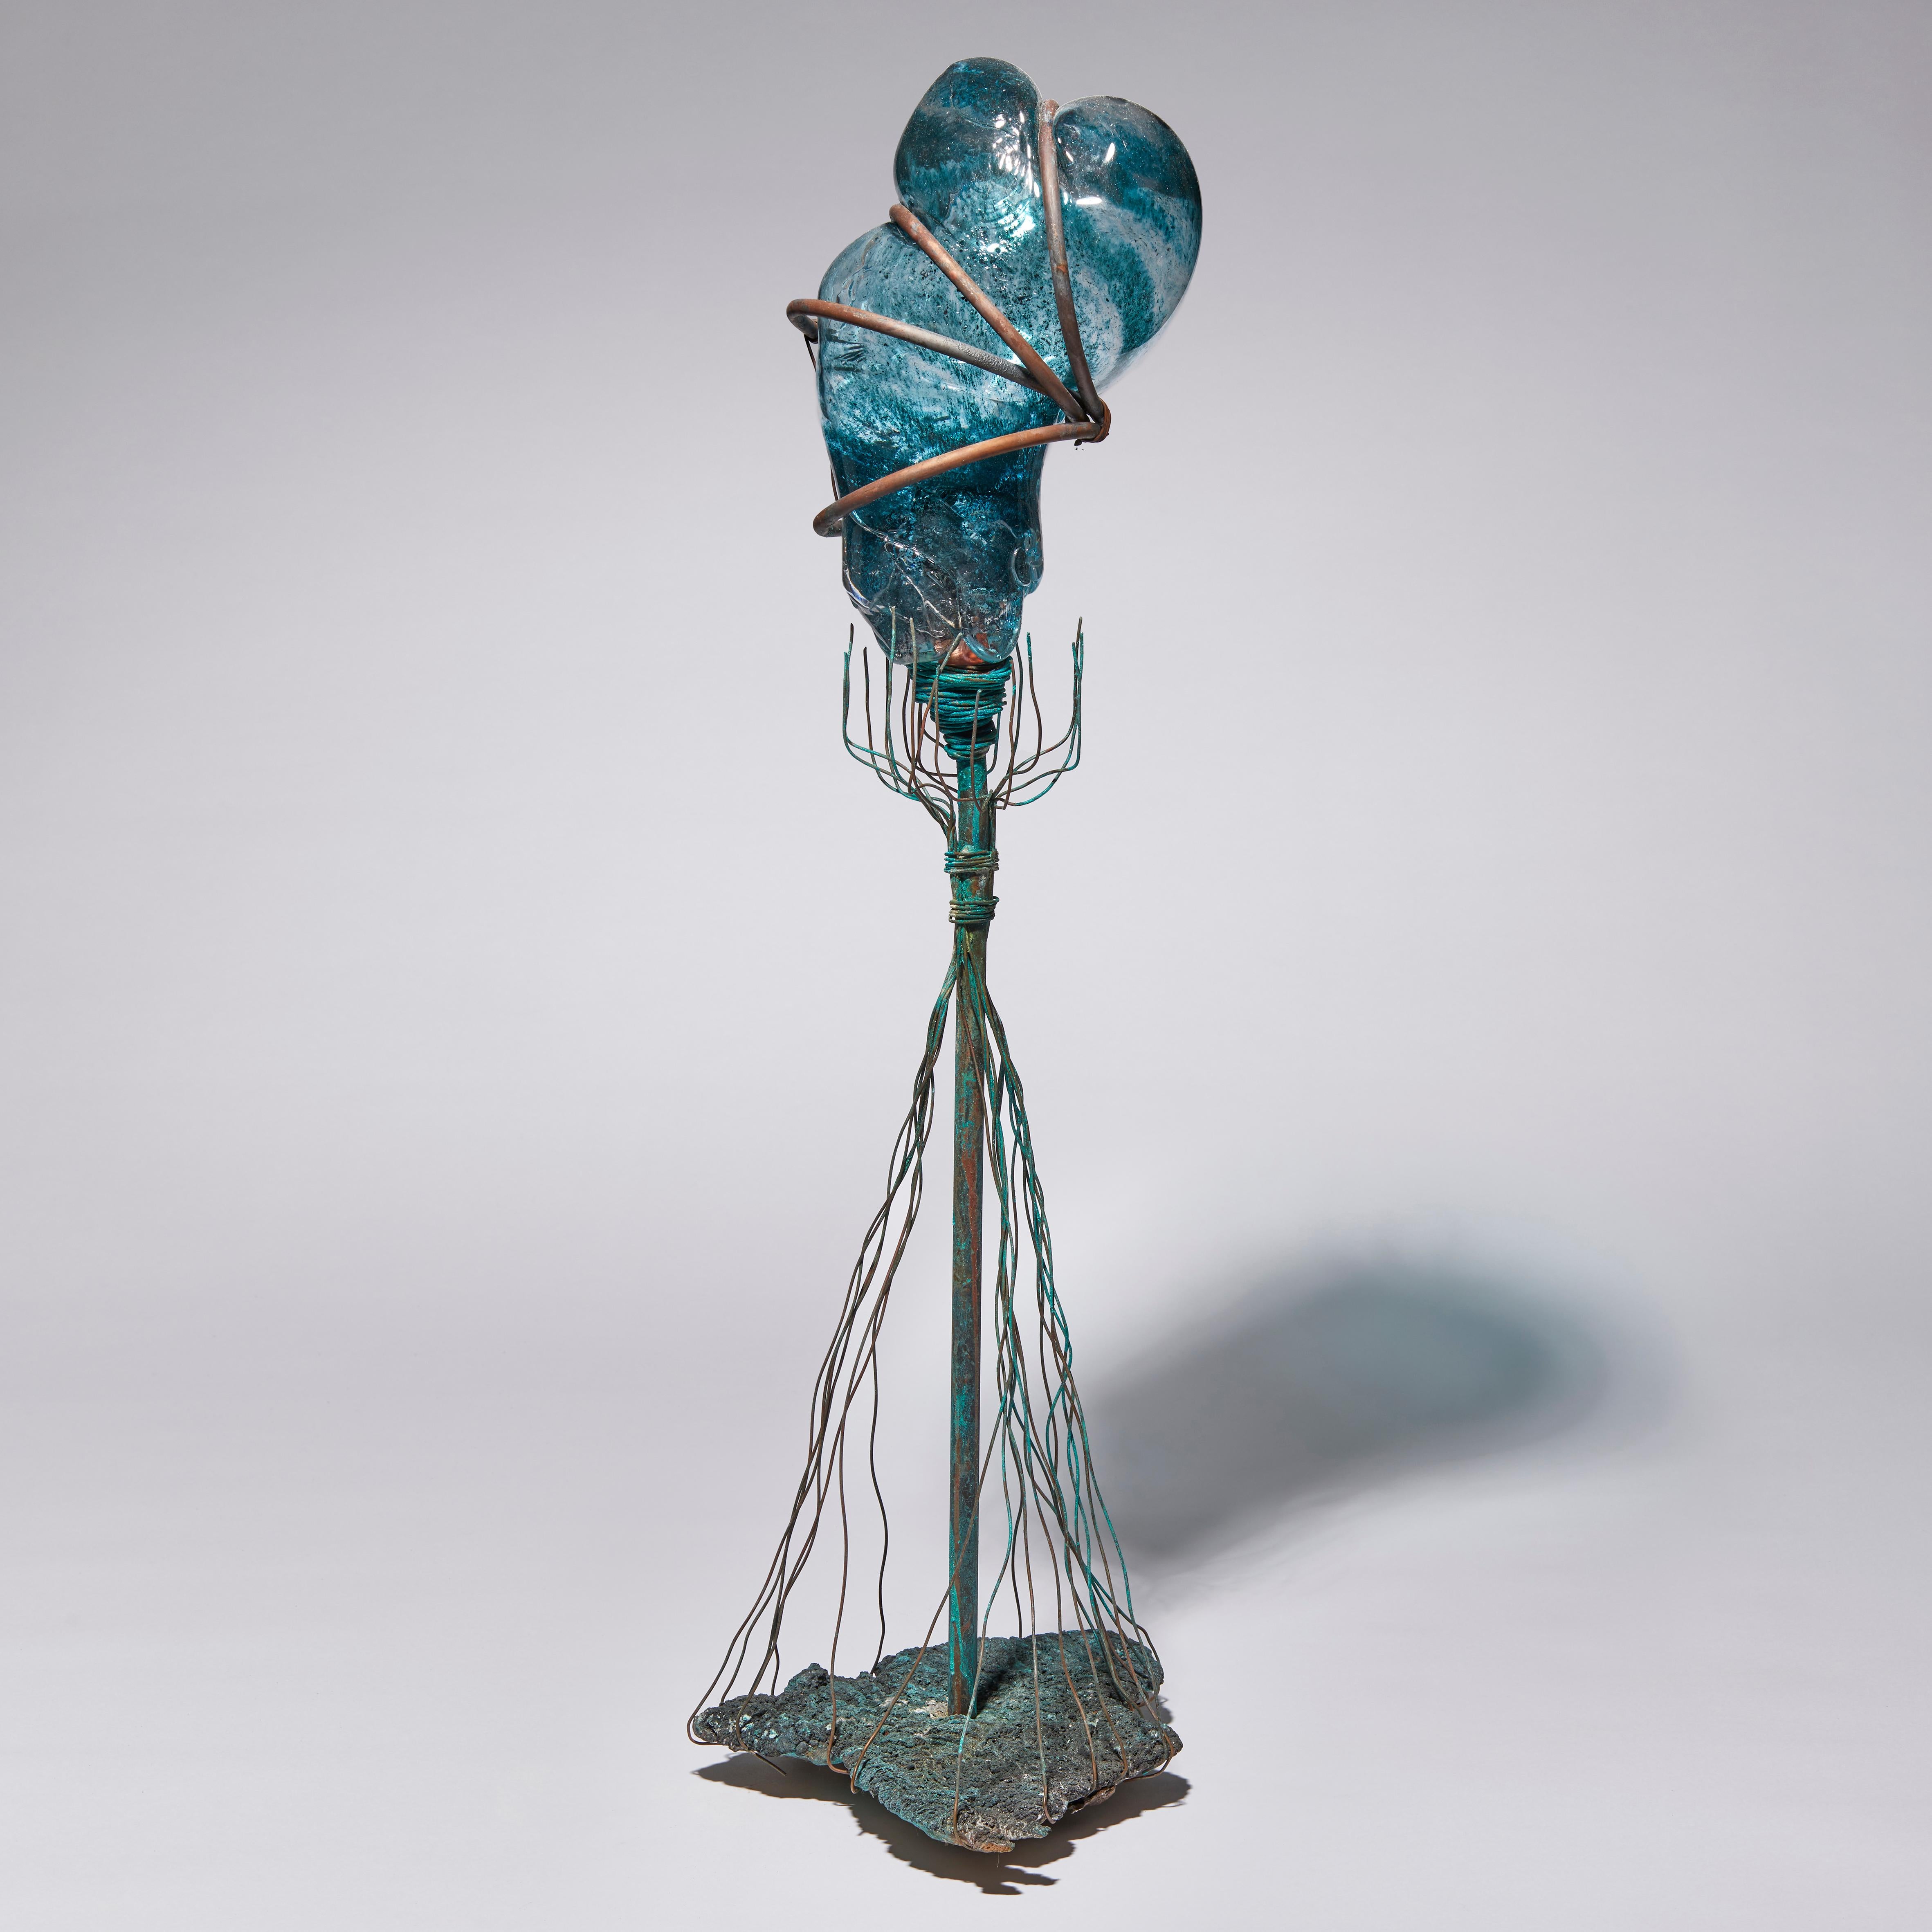 British Impostor Syndrome, a Unique Glass, Bronze and Copper Sculpture by Chris Day